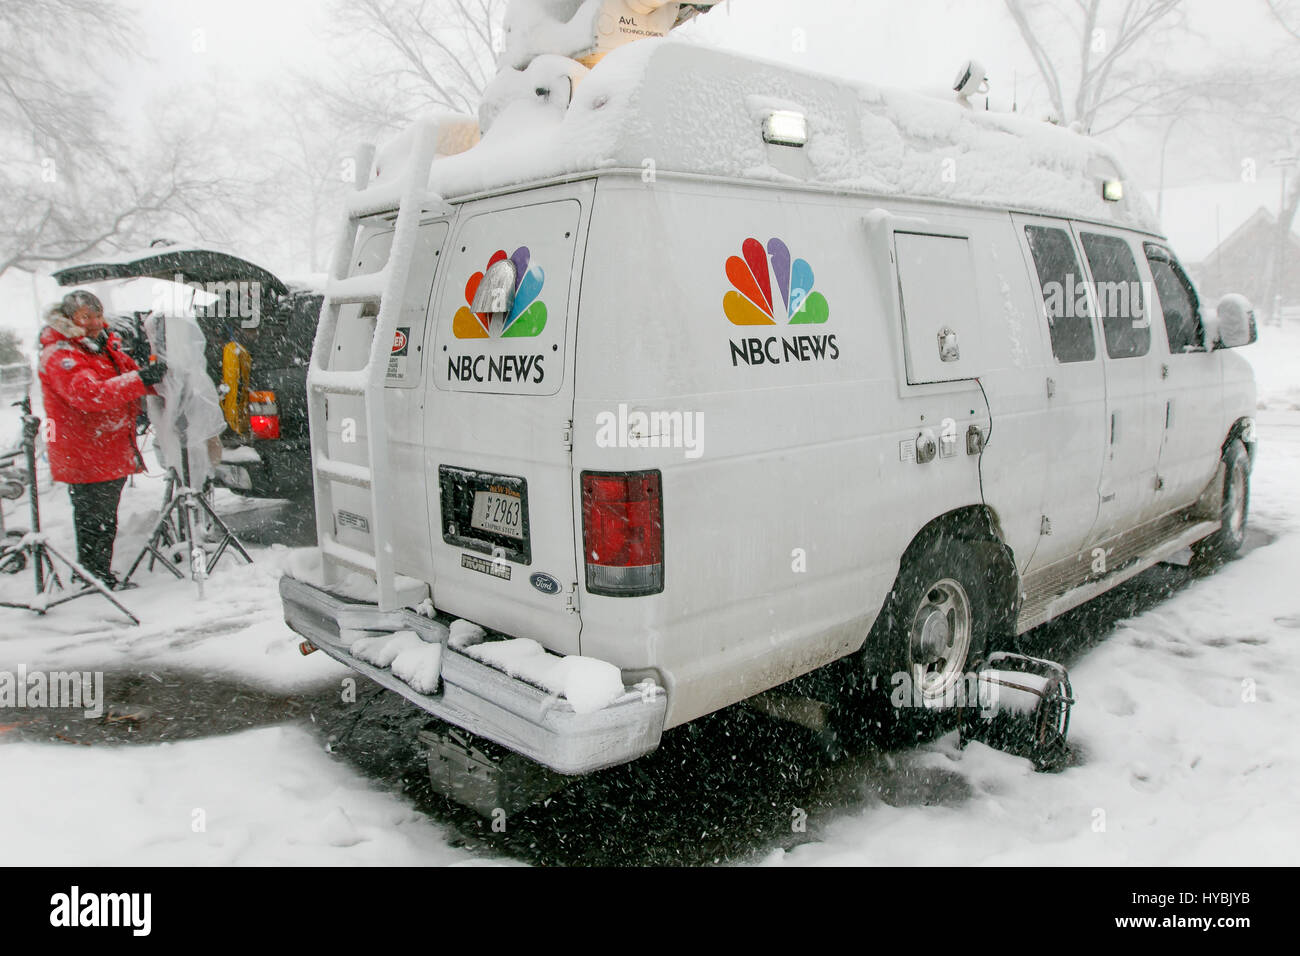 An NBC News employee is preparing broadcasting gear during a heavy snowfall in Central Park. Stock Photo